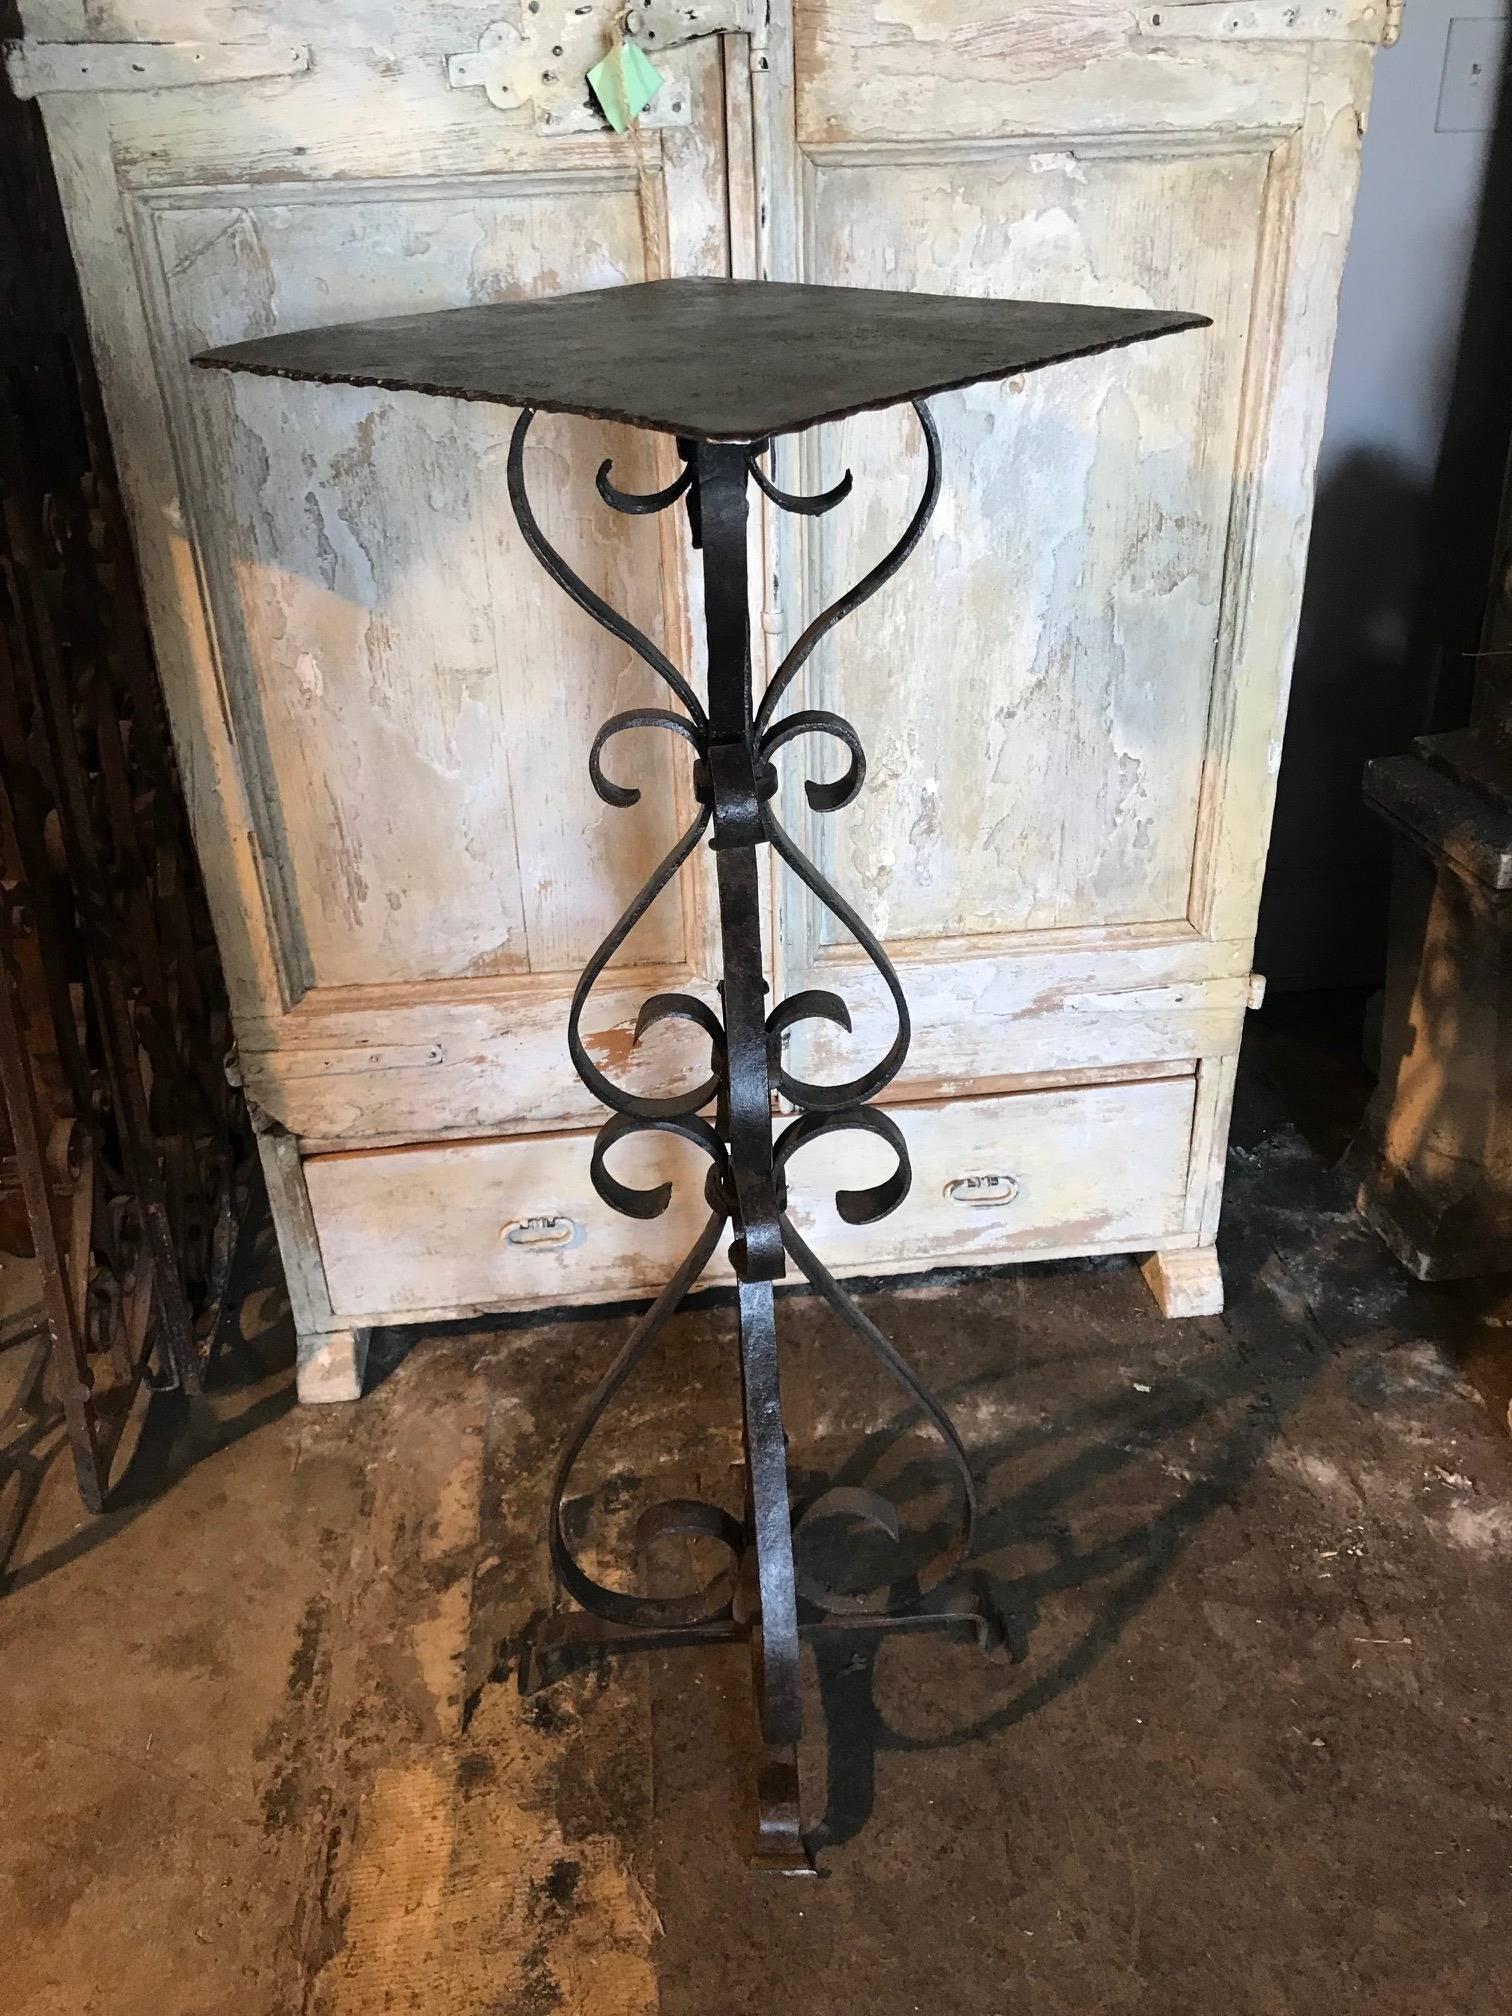 A French 18th century hand forged iron fragment now as a plant stand - pedestal. Excellent quality iron work with a very handsome patina. The stand has good weight to support a substantial bust or sculpture.